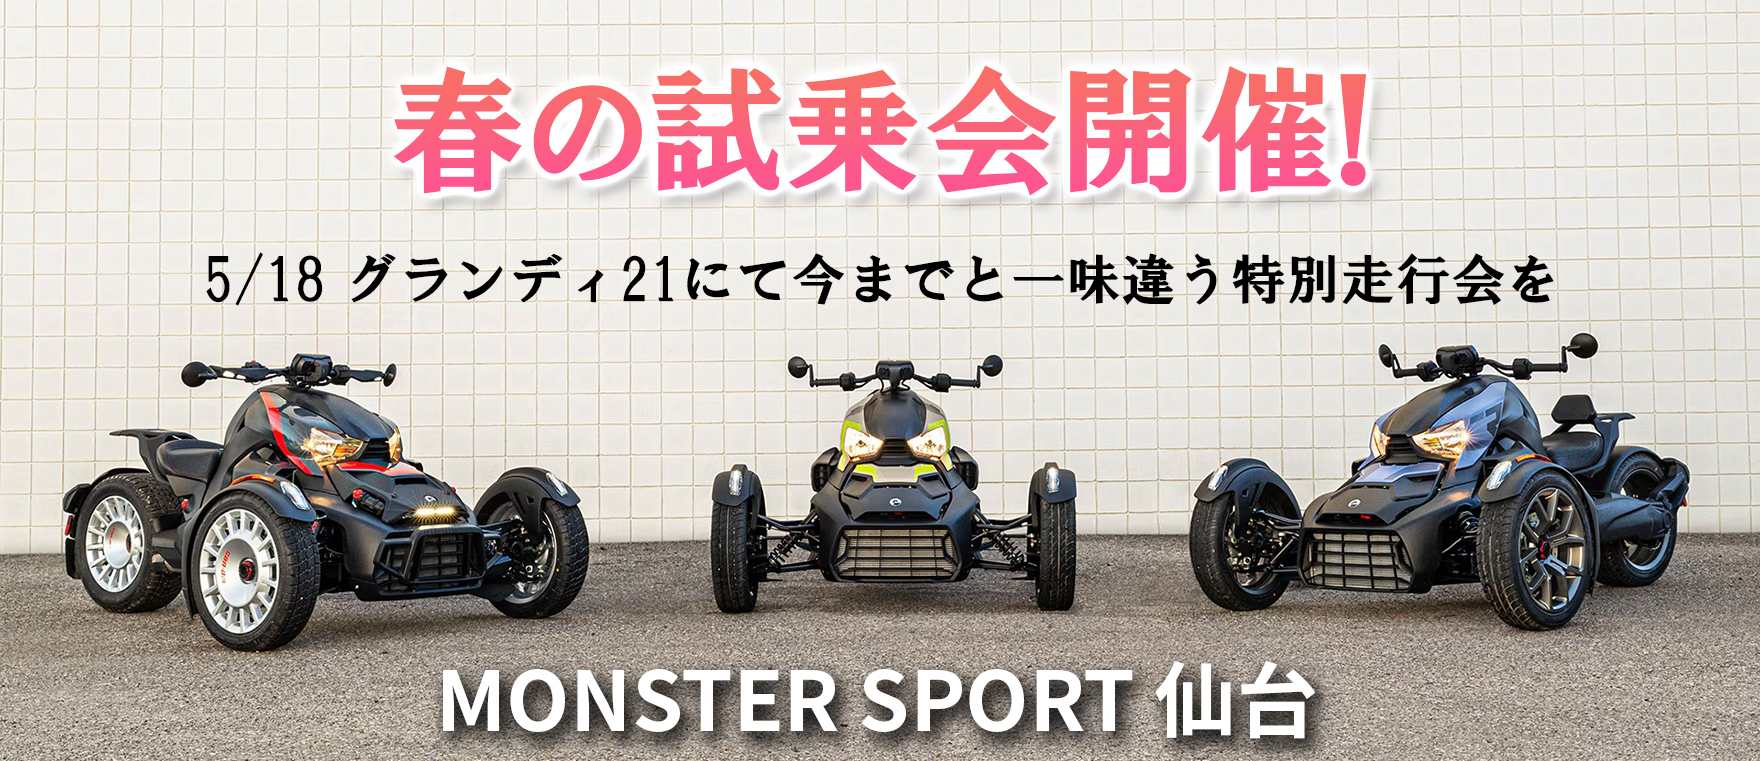 can-am ライカー 走行会 仙台